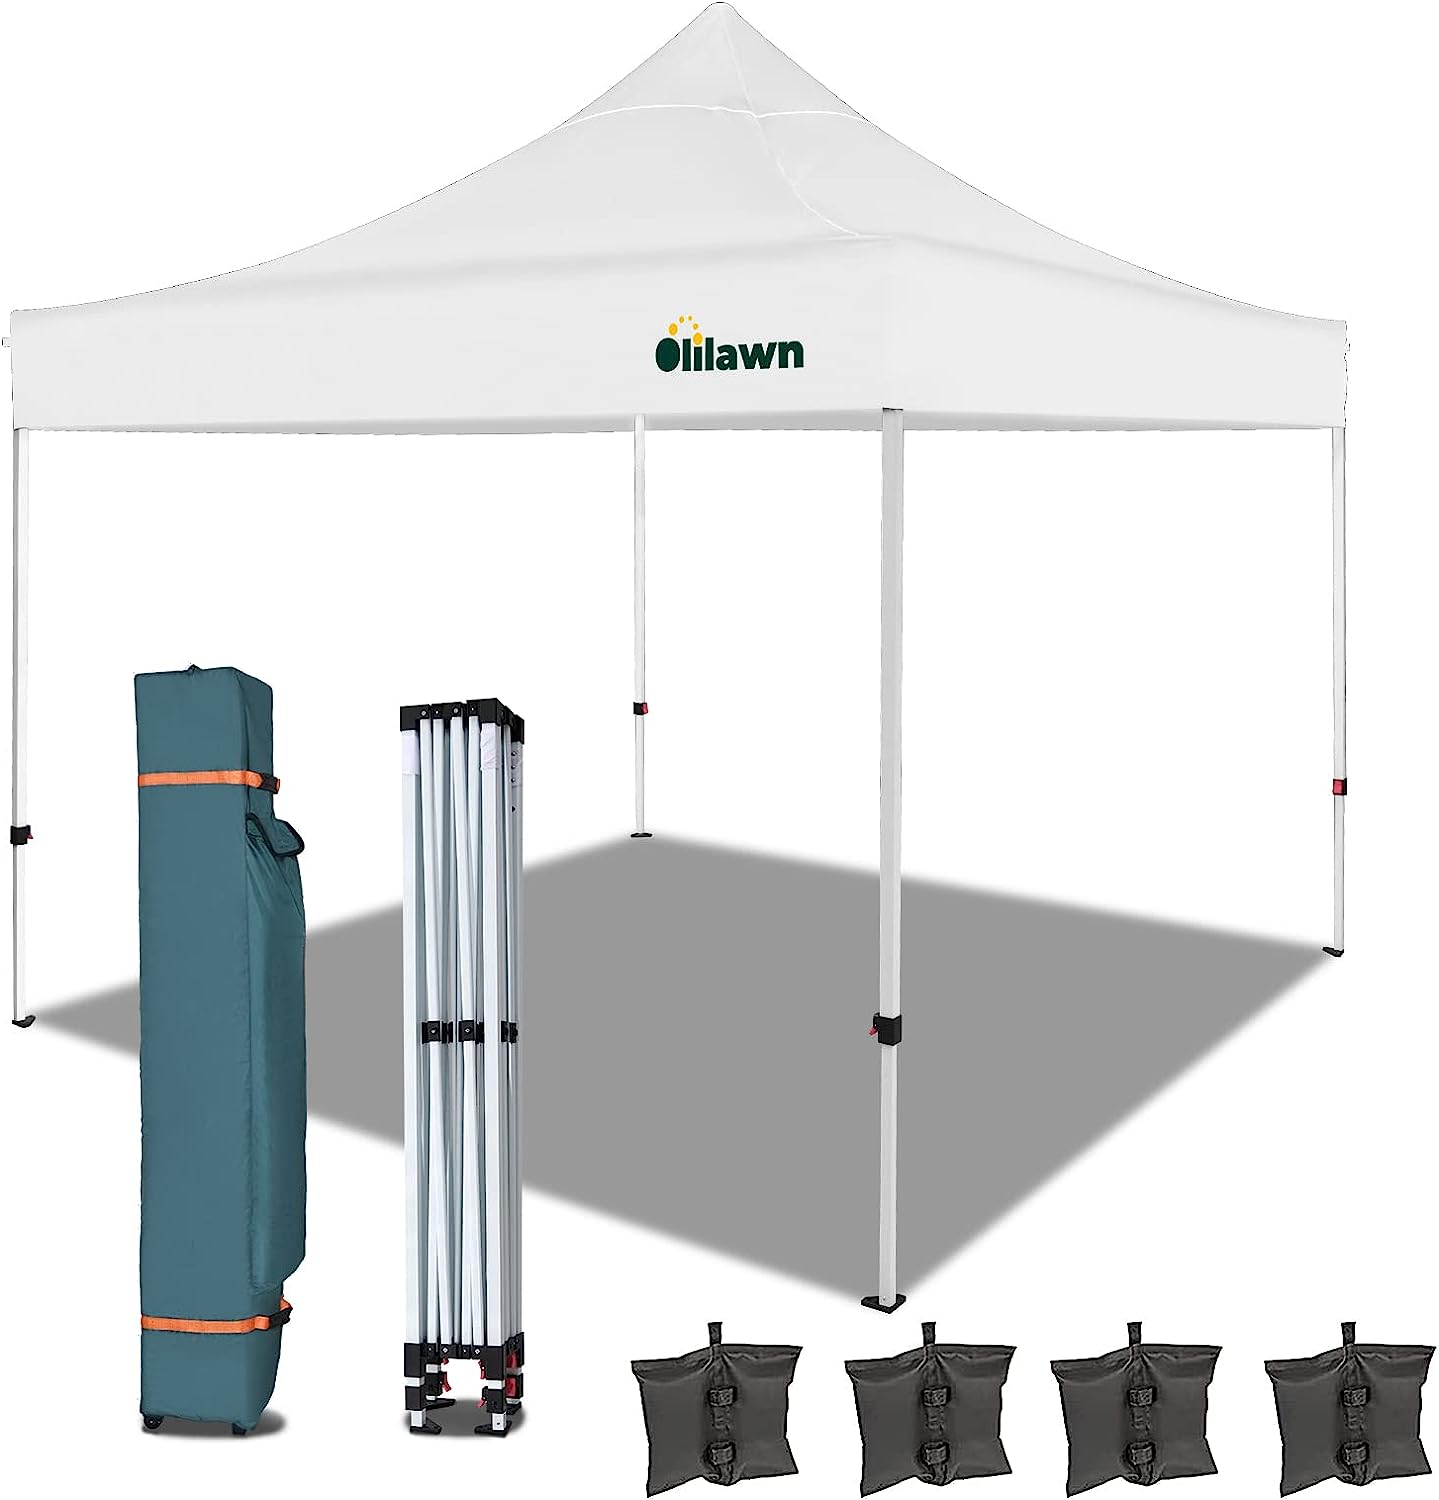 OLILAWN 10x10 Pop Up Canopy Tent white